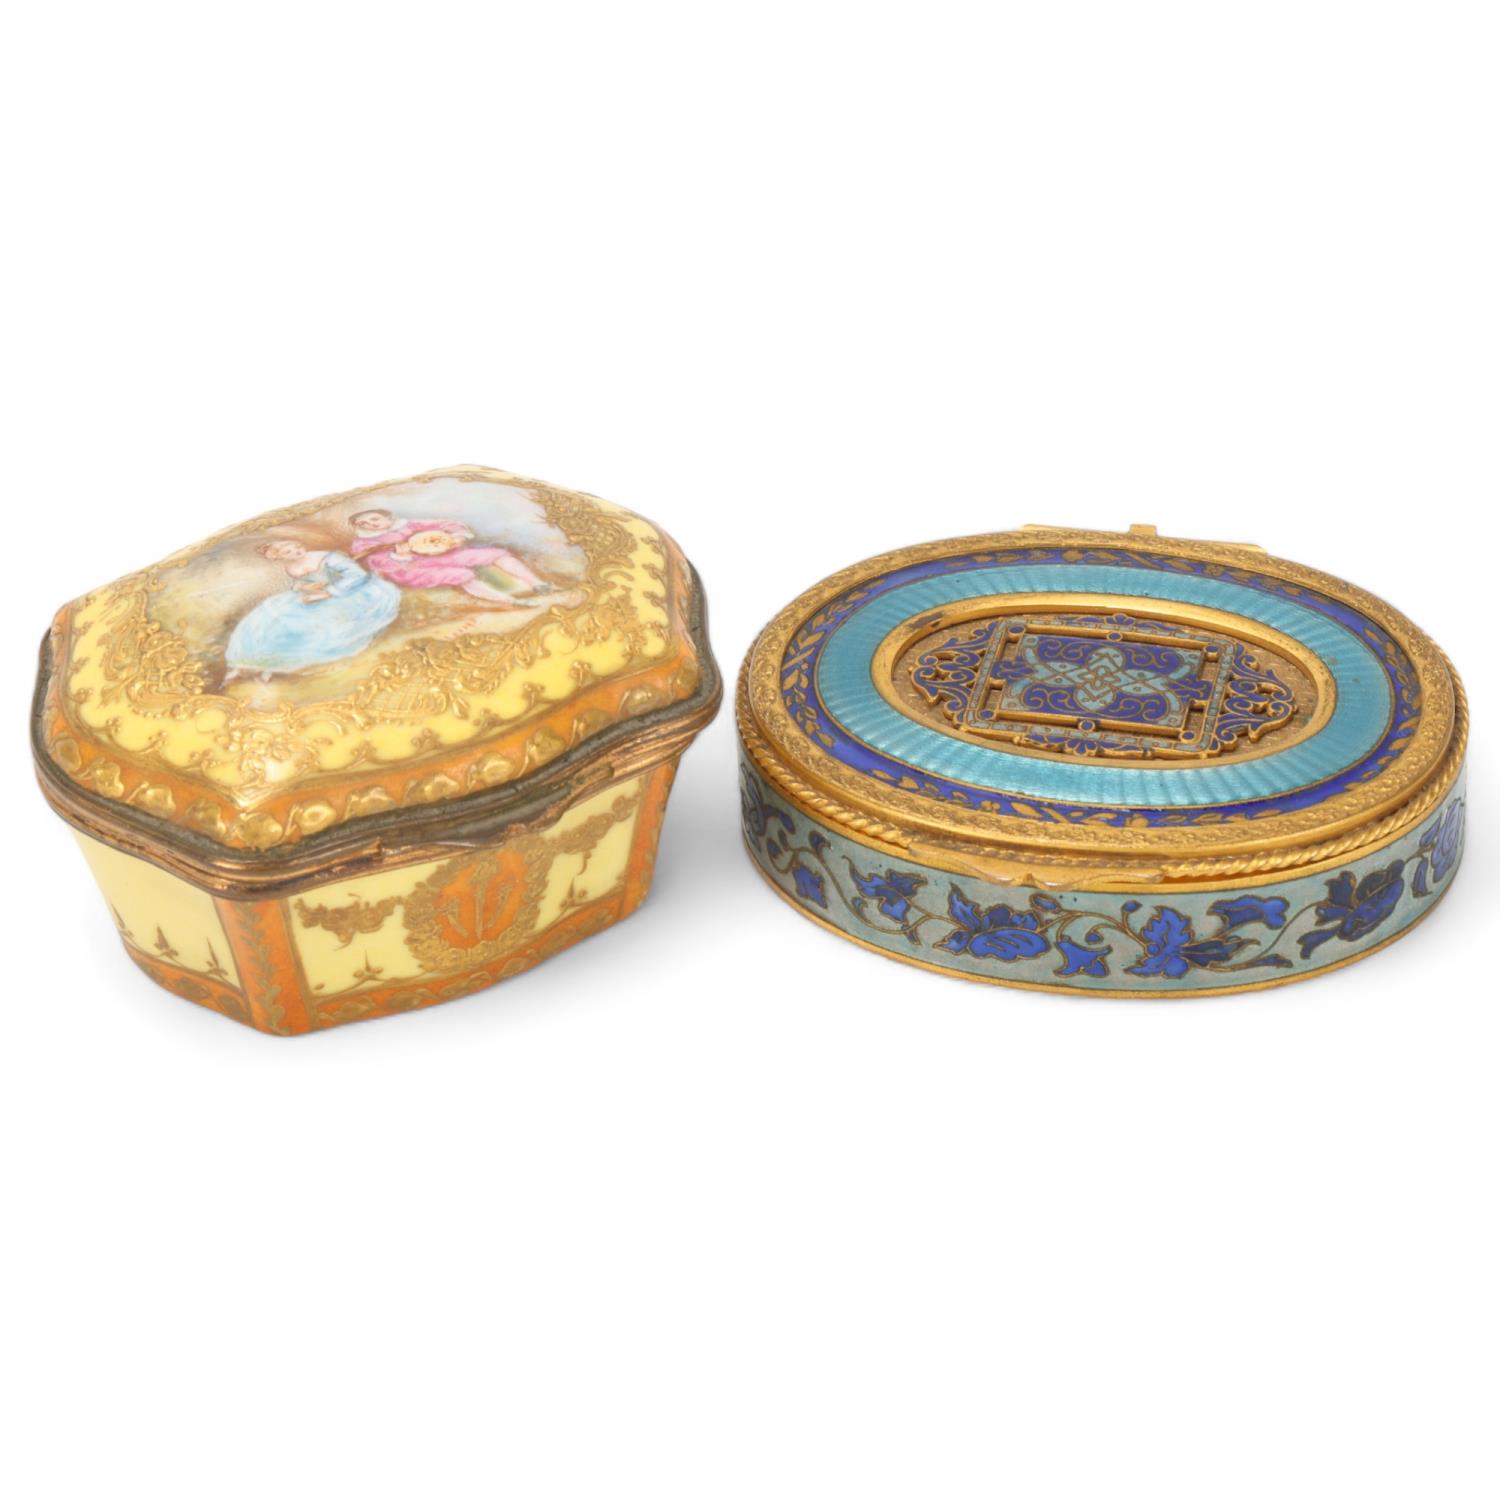 A French gilt-brass and enamel oval box, circa 1900, length 9cm, and a small French porcelain